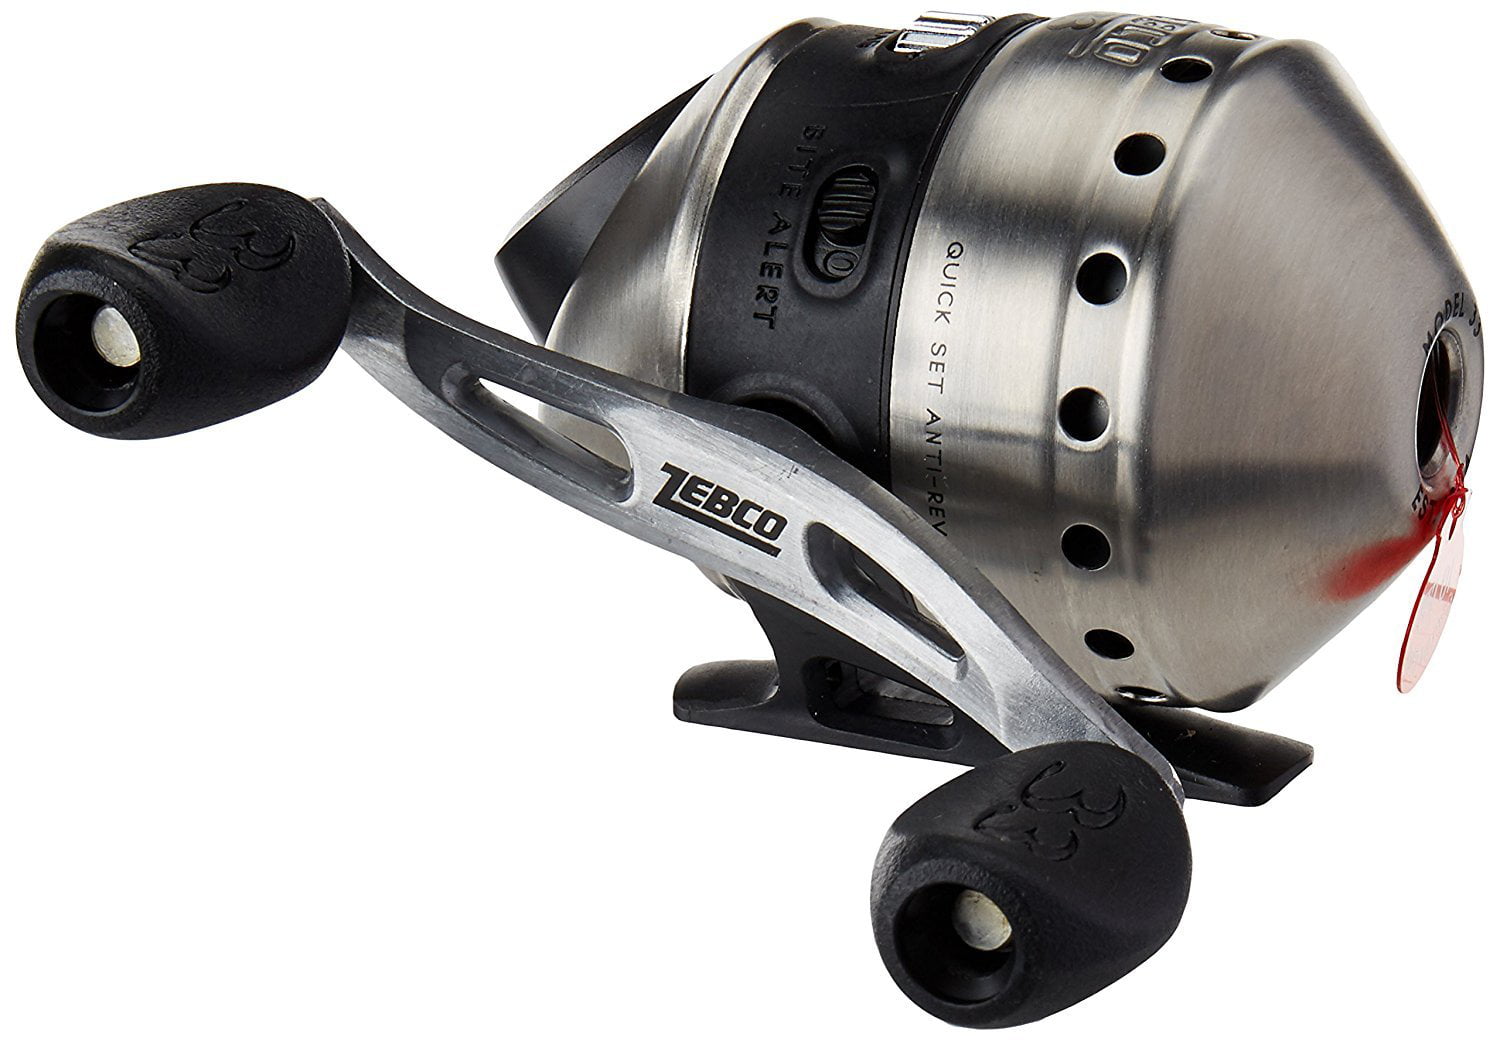 How to Spool a Zebco 33 Fishing Reel 